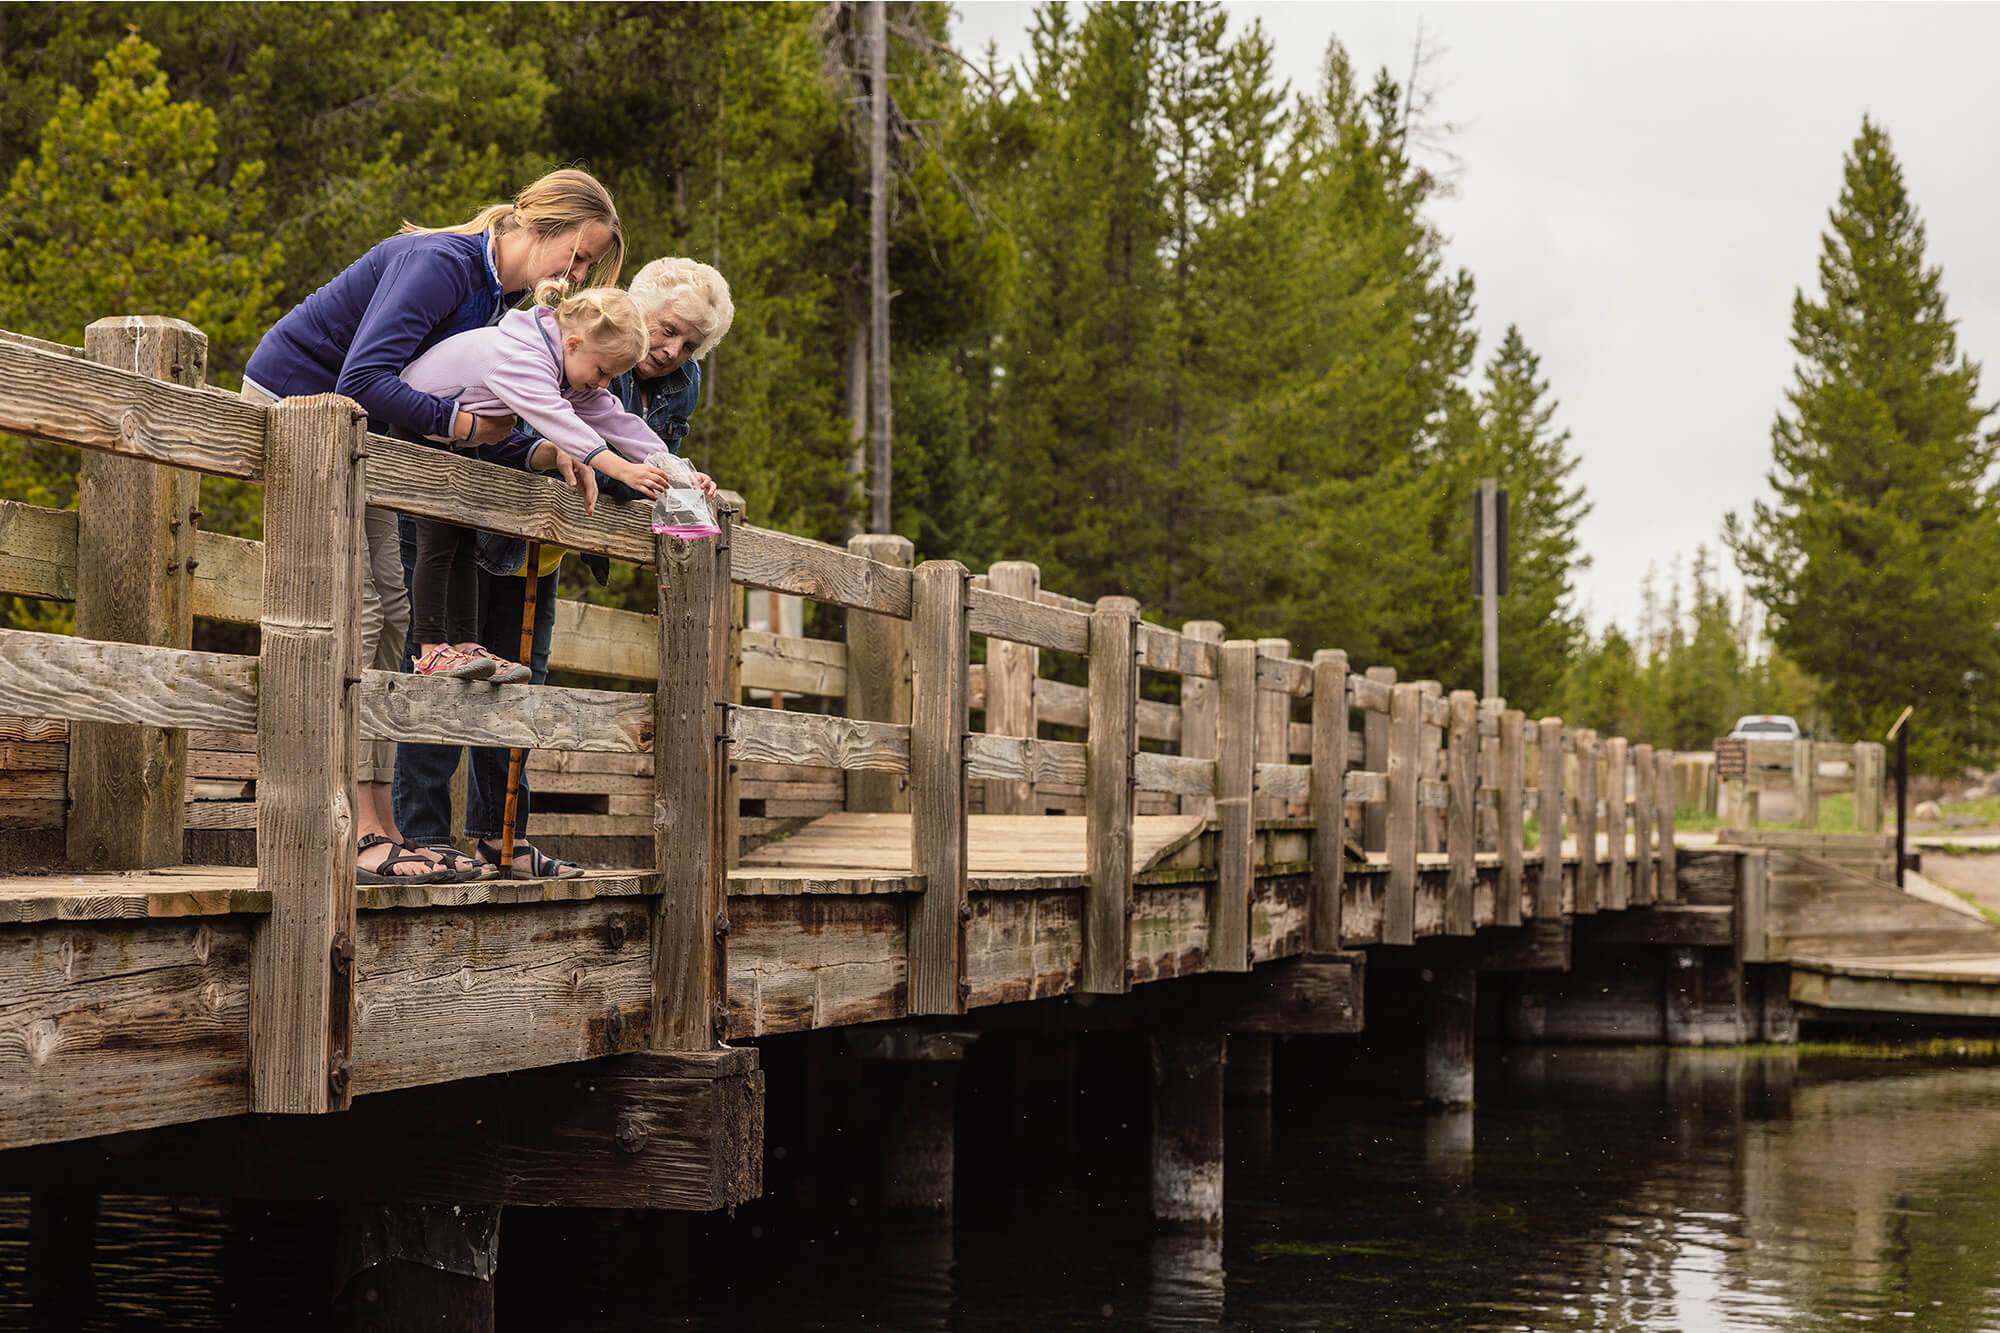 Three generations of women stand on a wooden bridge and feed the fish below.